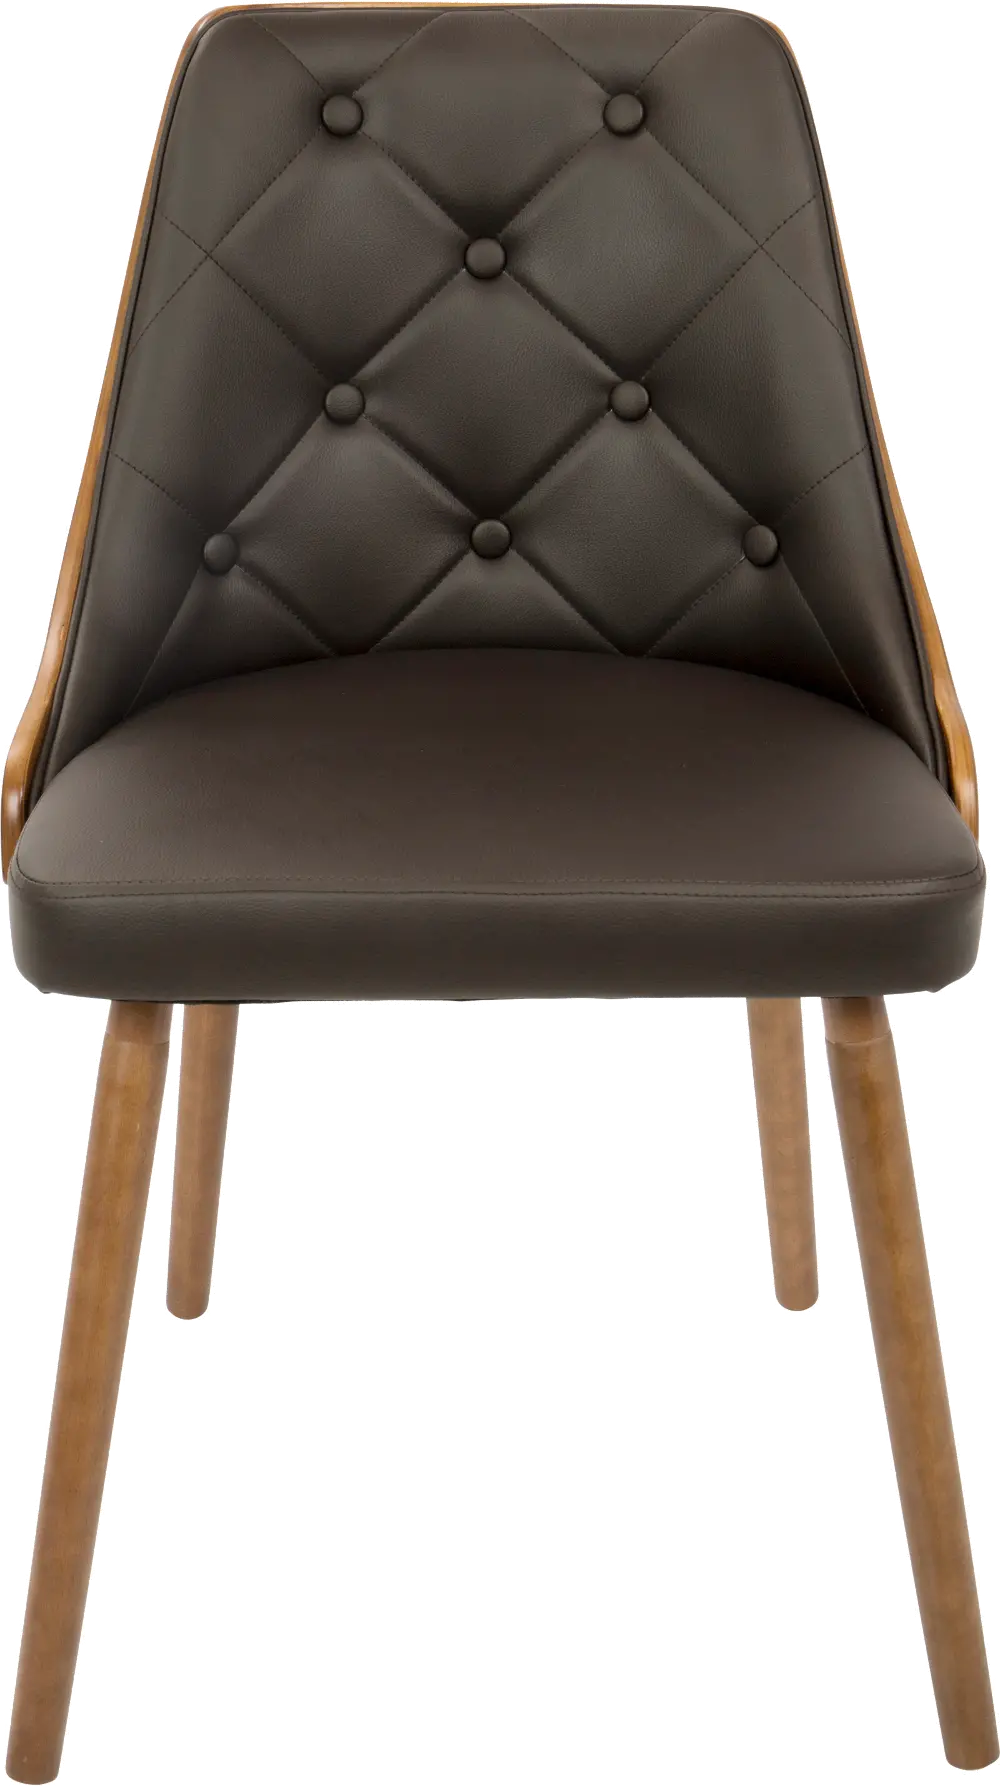 CH-JY-GNN-WL-BN Mid Century Black and Brown Faux Leather Dining Room Chair - Gianna-1